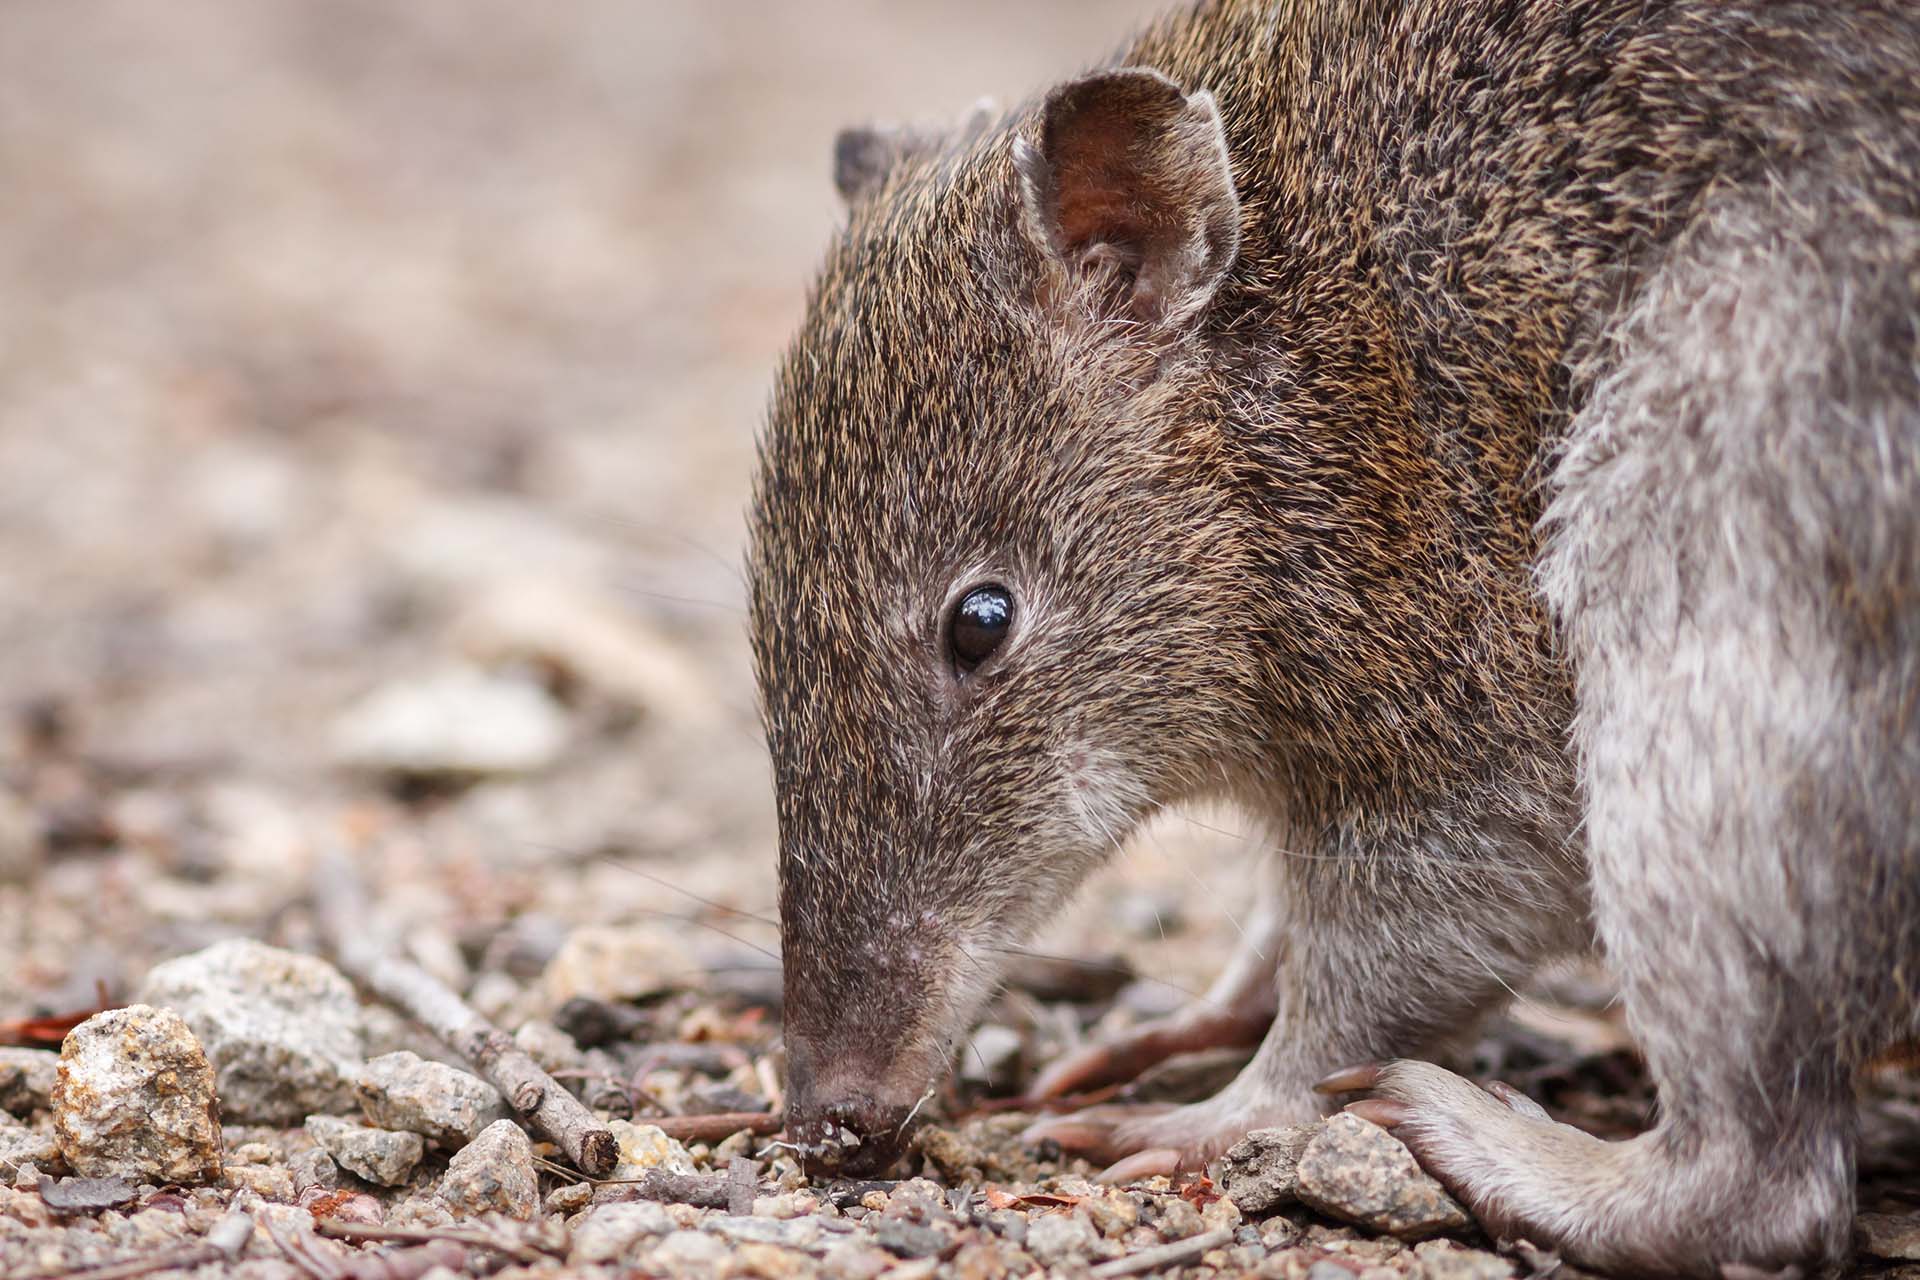 A southern brown bandicoot foraging.